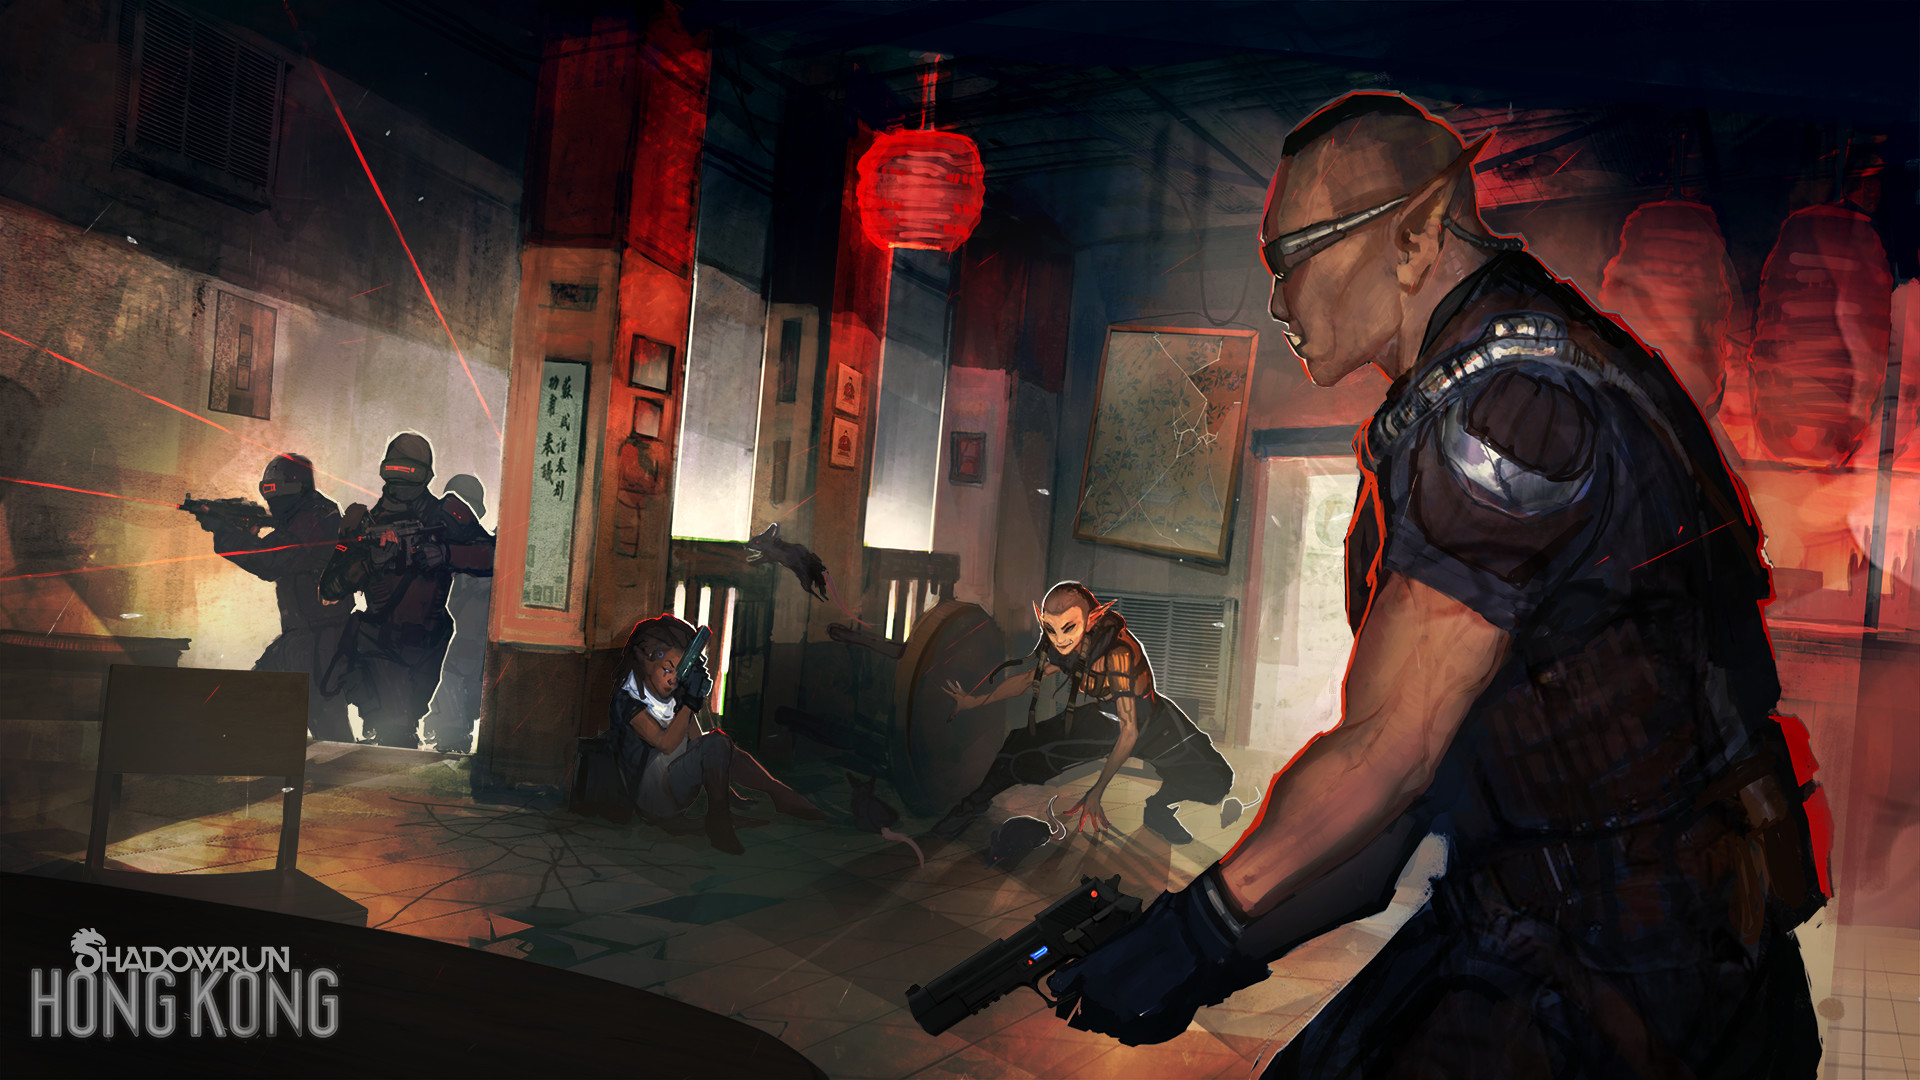 Shadowrun: Hong Kong High Quality 9x12 Art Print SIGNED by Joel DuQue  (Includes soundtrack download)